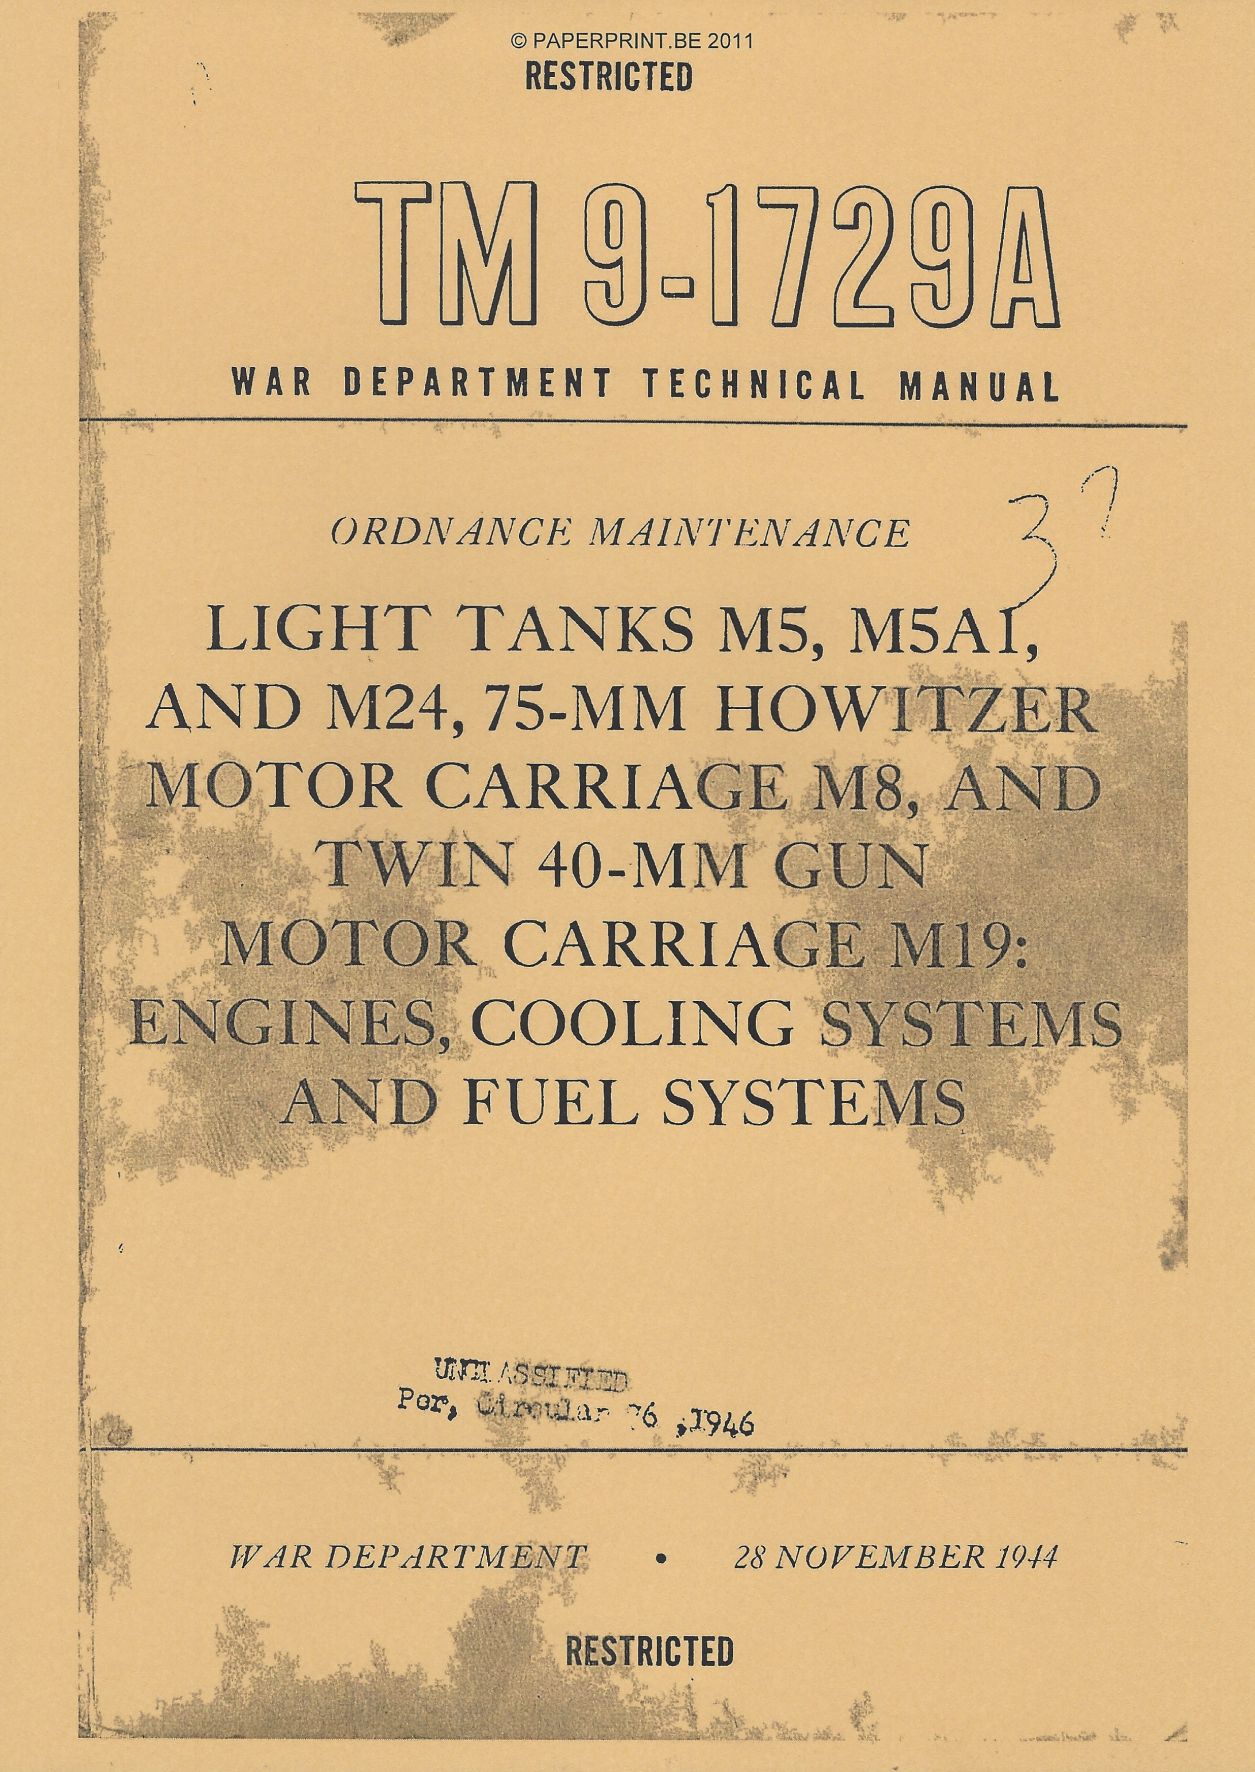 TM 9-1729A US LIGHT TANKS M5, M5A1, AND M24, 75-MM HOWITZER MOTOR CARRIAGE M8, AND TWIN 40-MM GUN MOTOR CARRIAGE M19: ENGINES, C